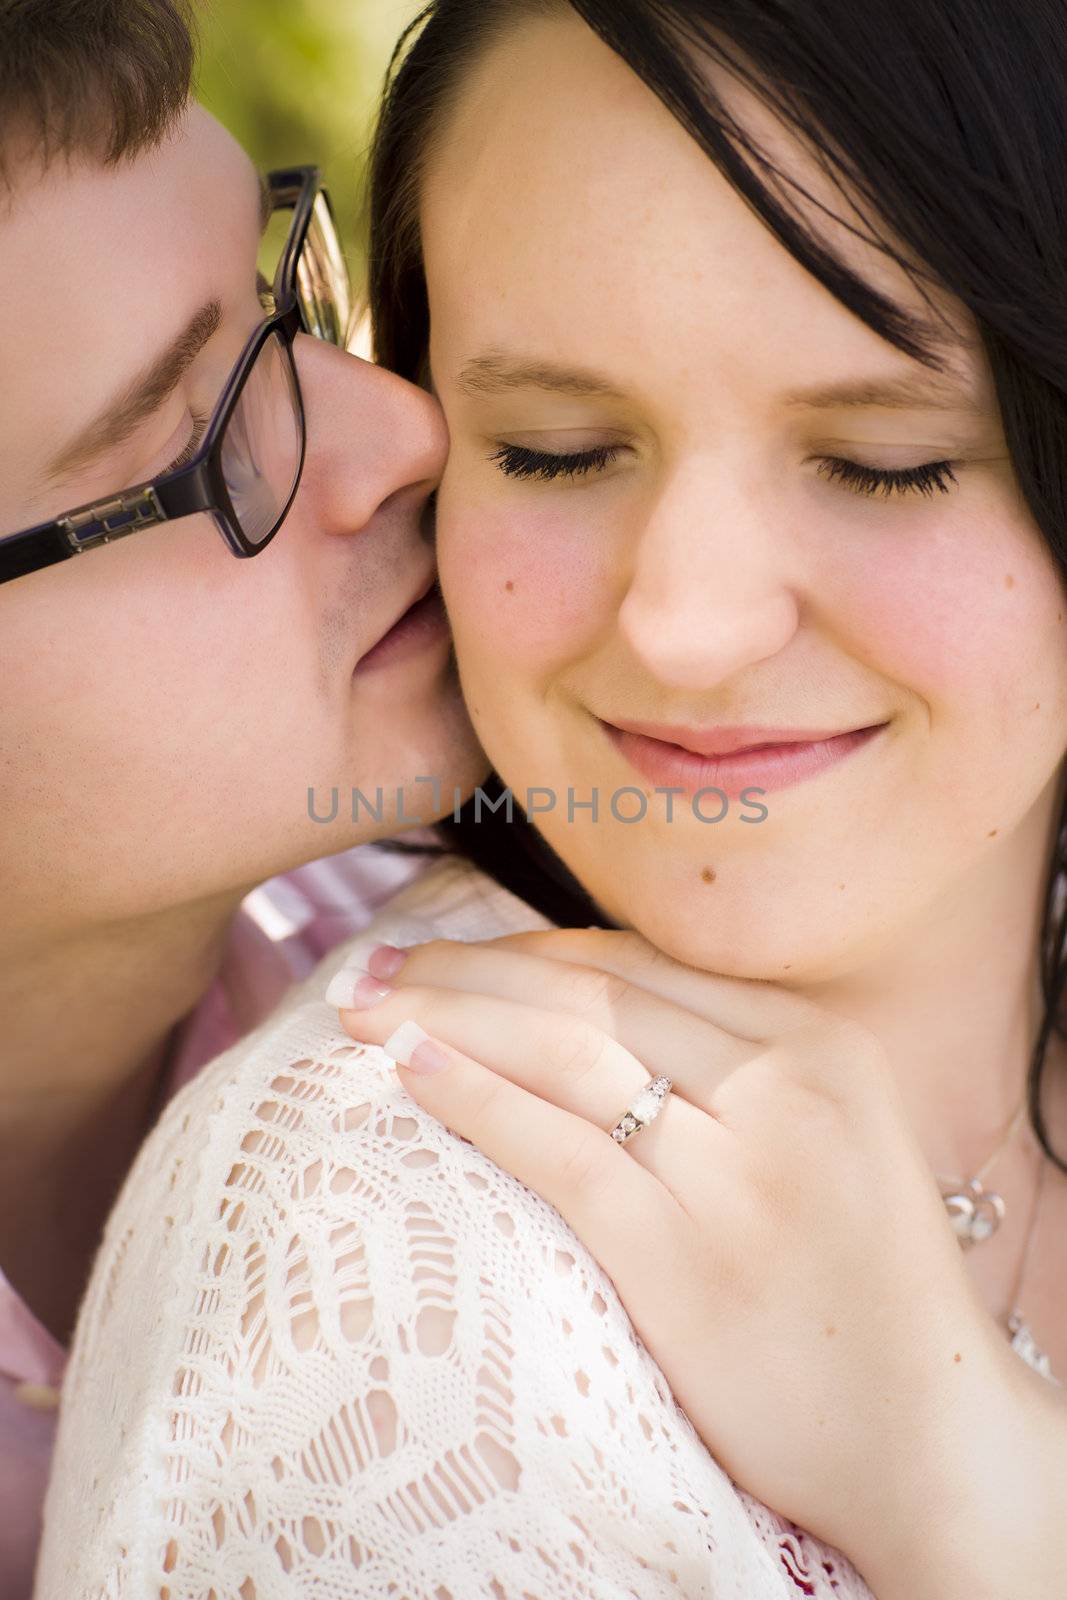 Attractive Young Engaged Couple Sharing an Intimate Moment in the Park.